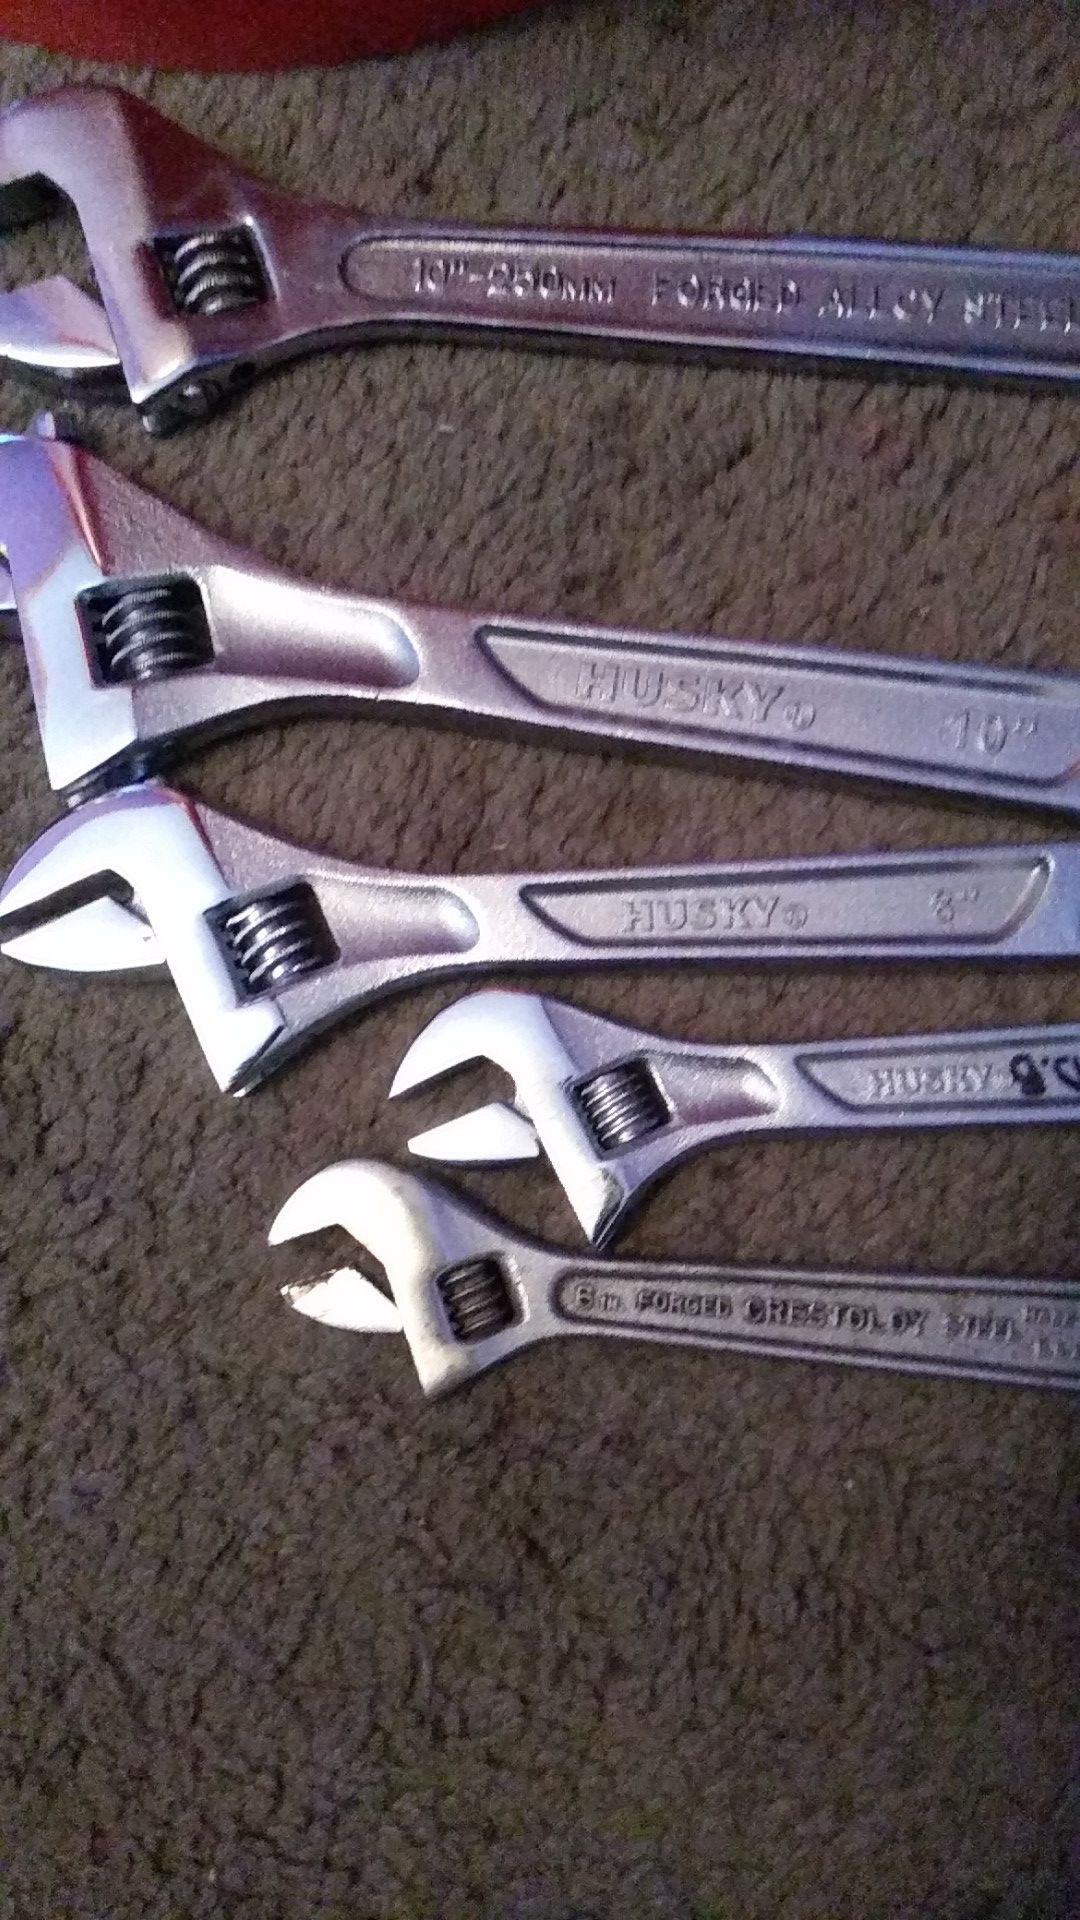 5 crescent wrenches in good condition